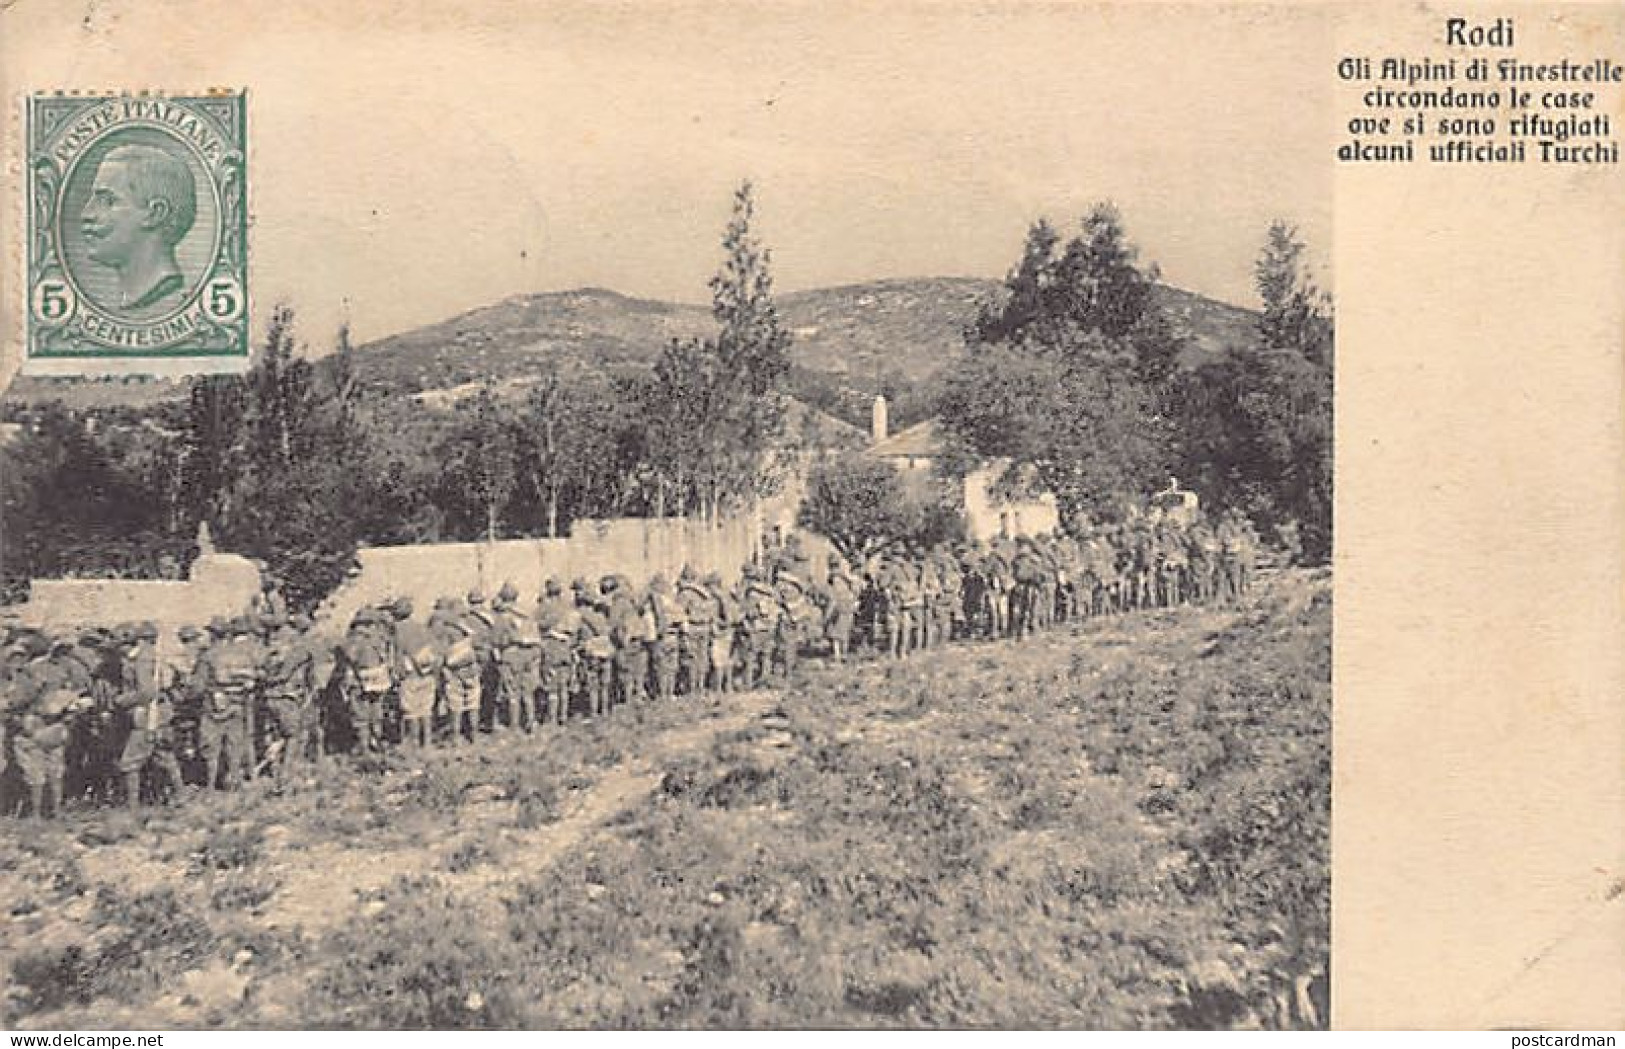 Greece - RHODES - The Alpini (Mountain Troops) Of Finistrelle Surround The Houses Where Some Turkish Officers Took Refug - Grecia